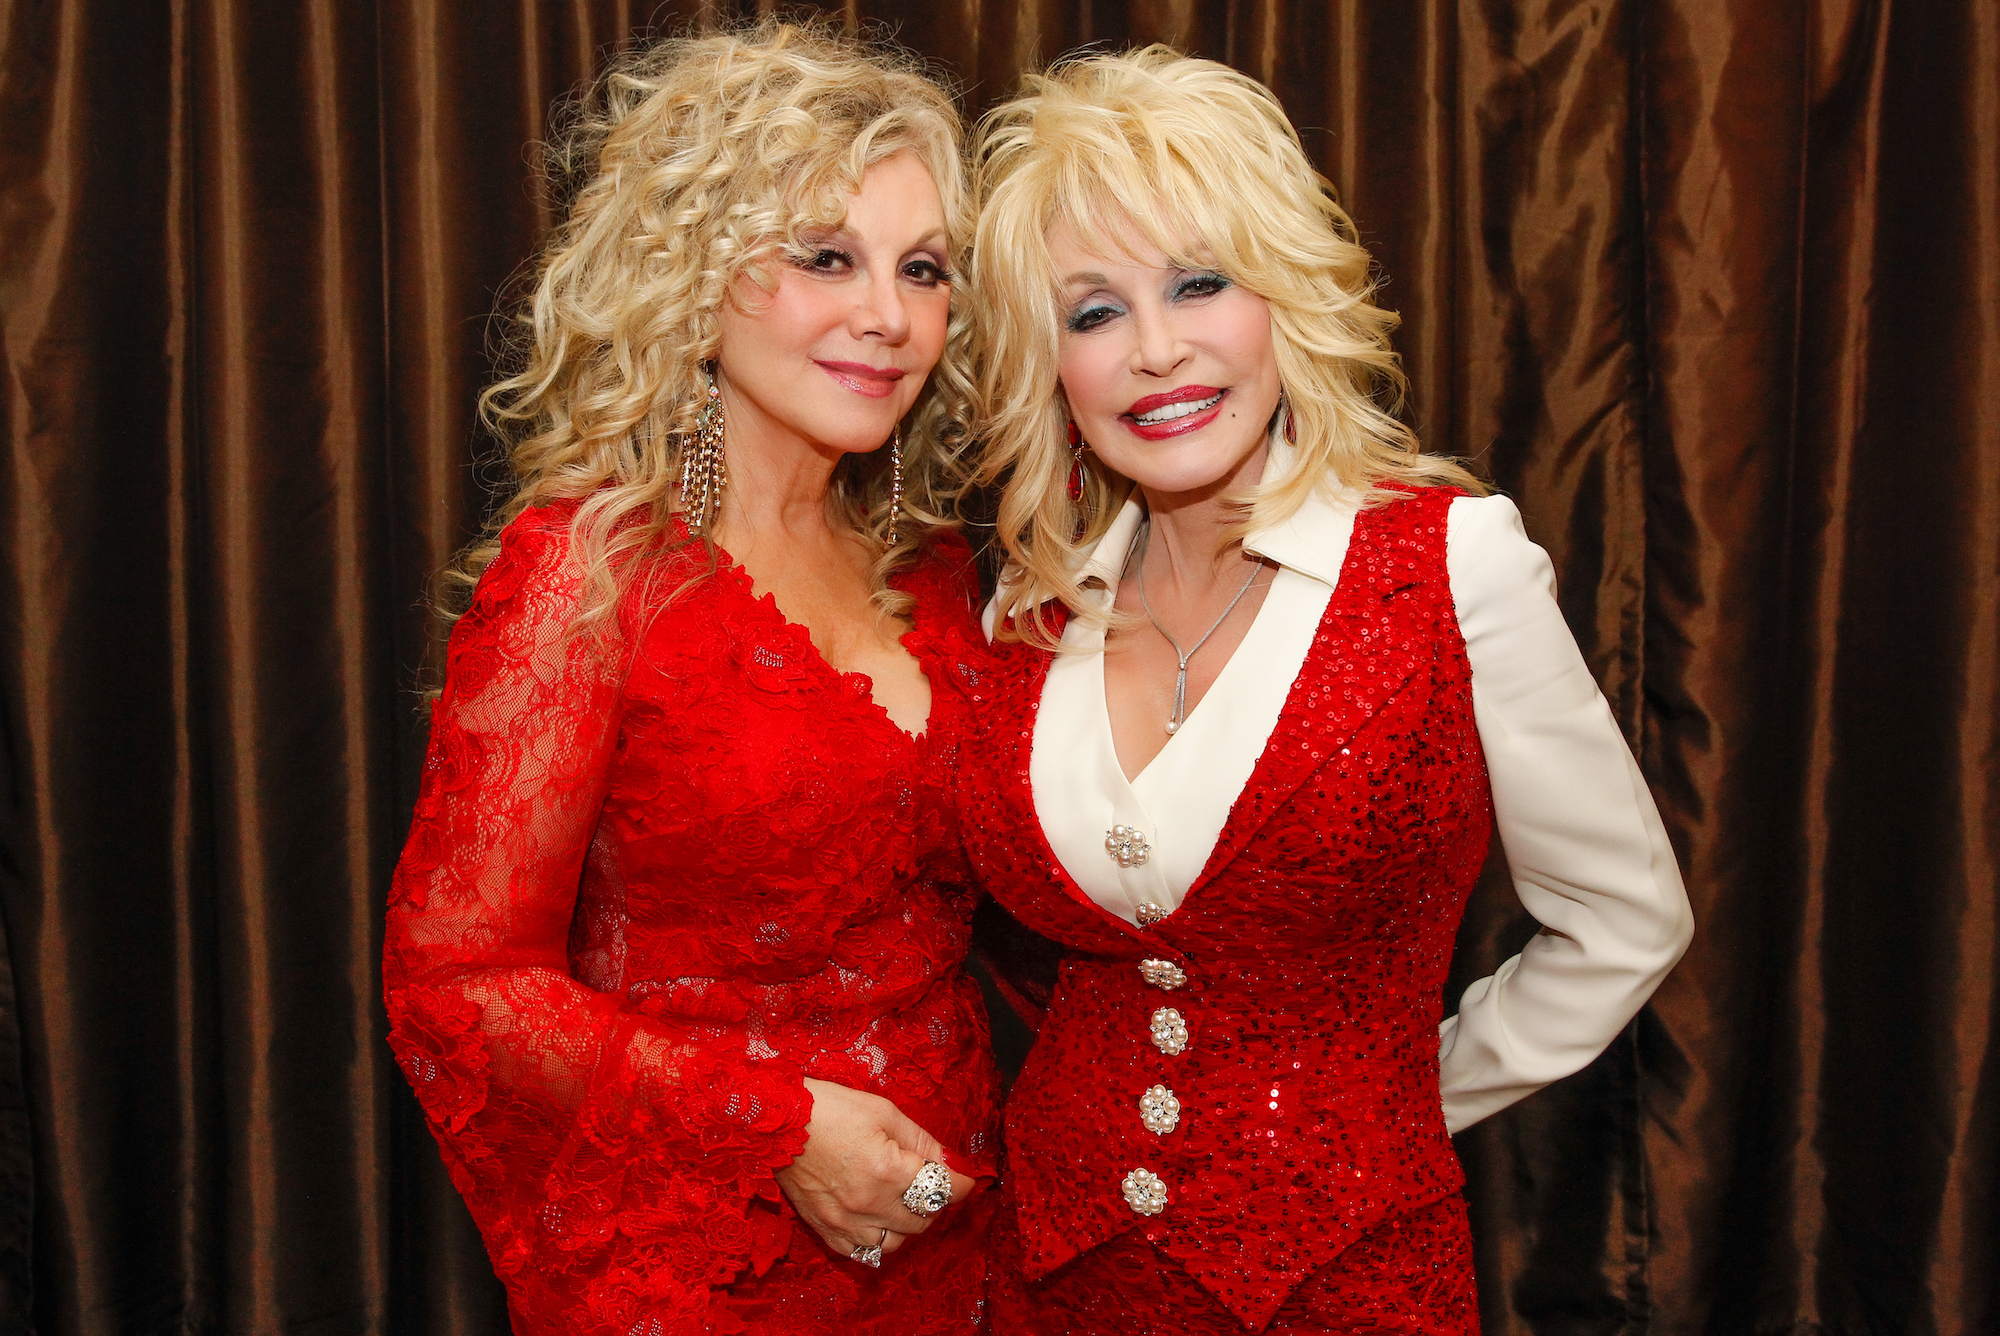 Stella and Dolly Parton attending Stella Parton's Red Tent Women's Conference in 2014 